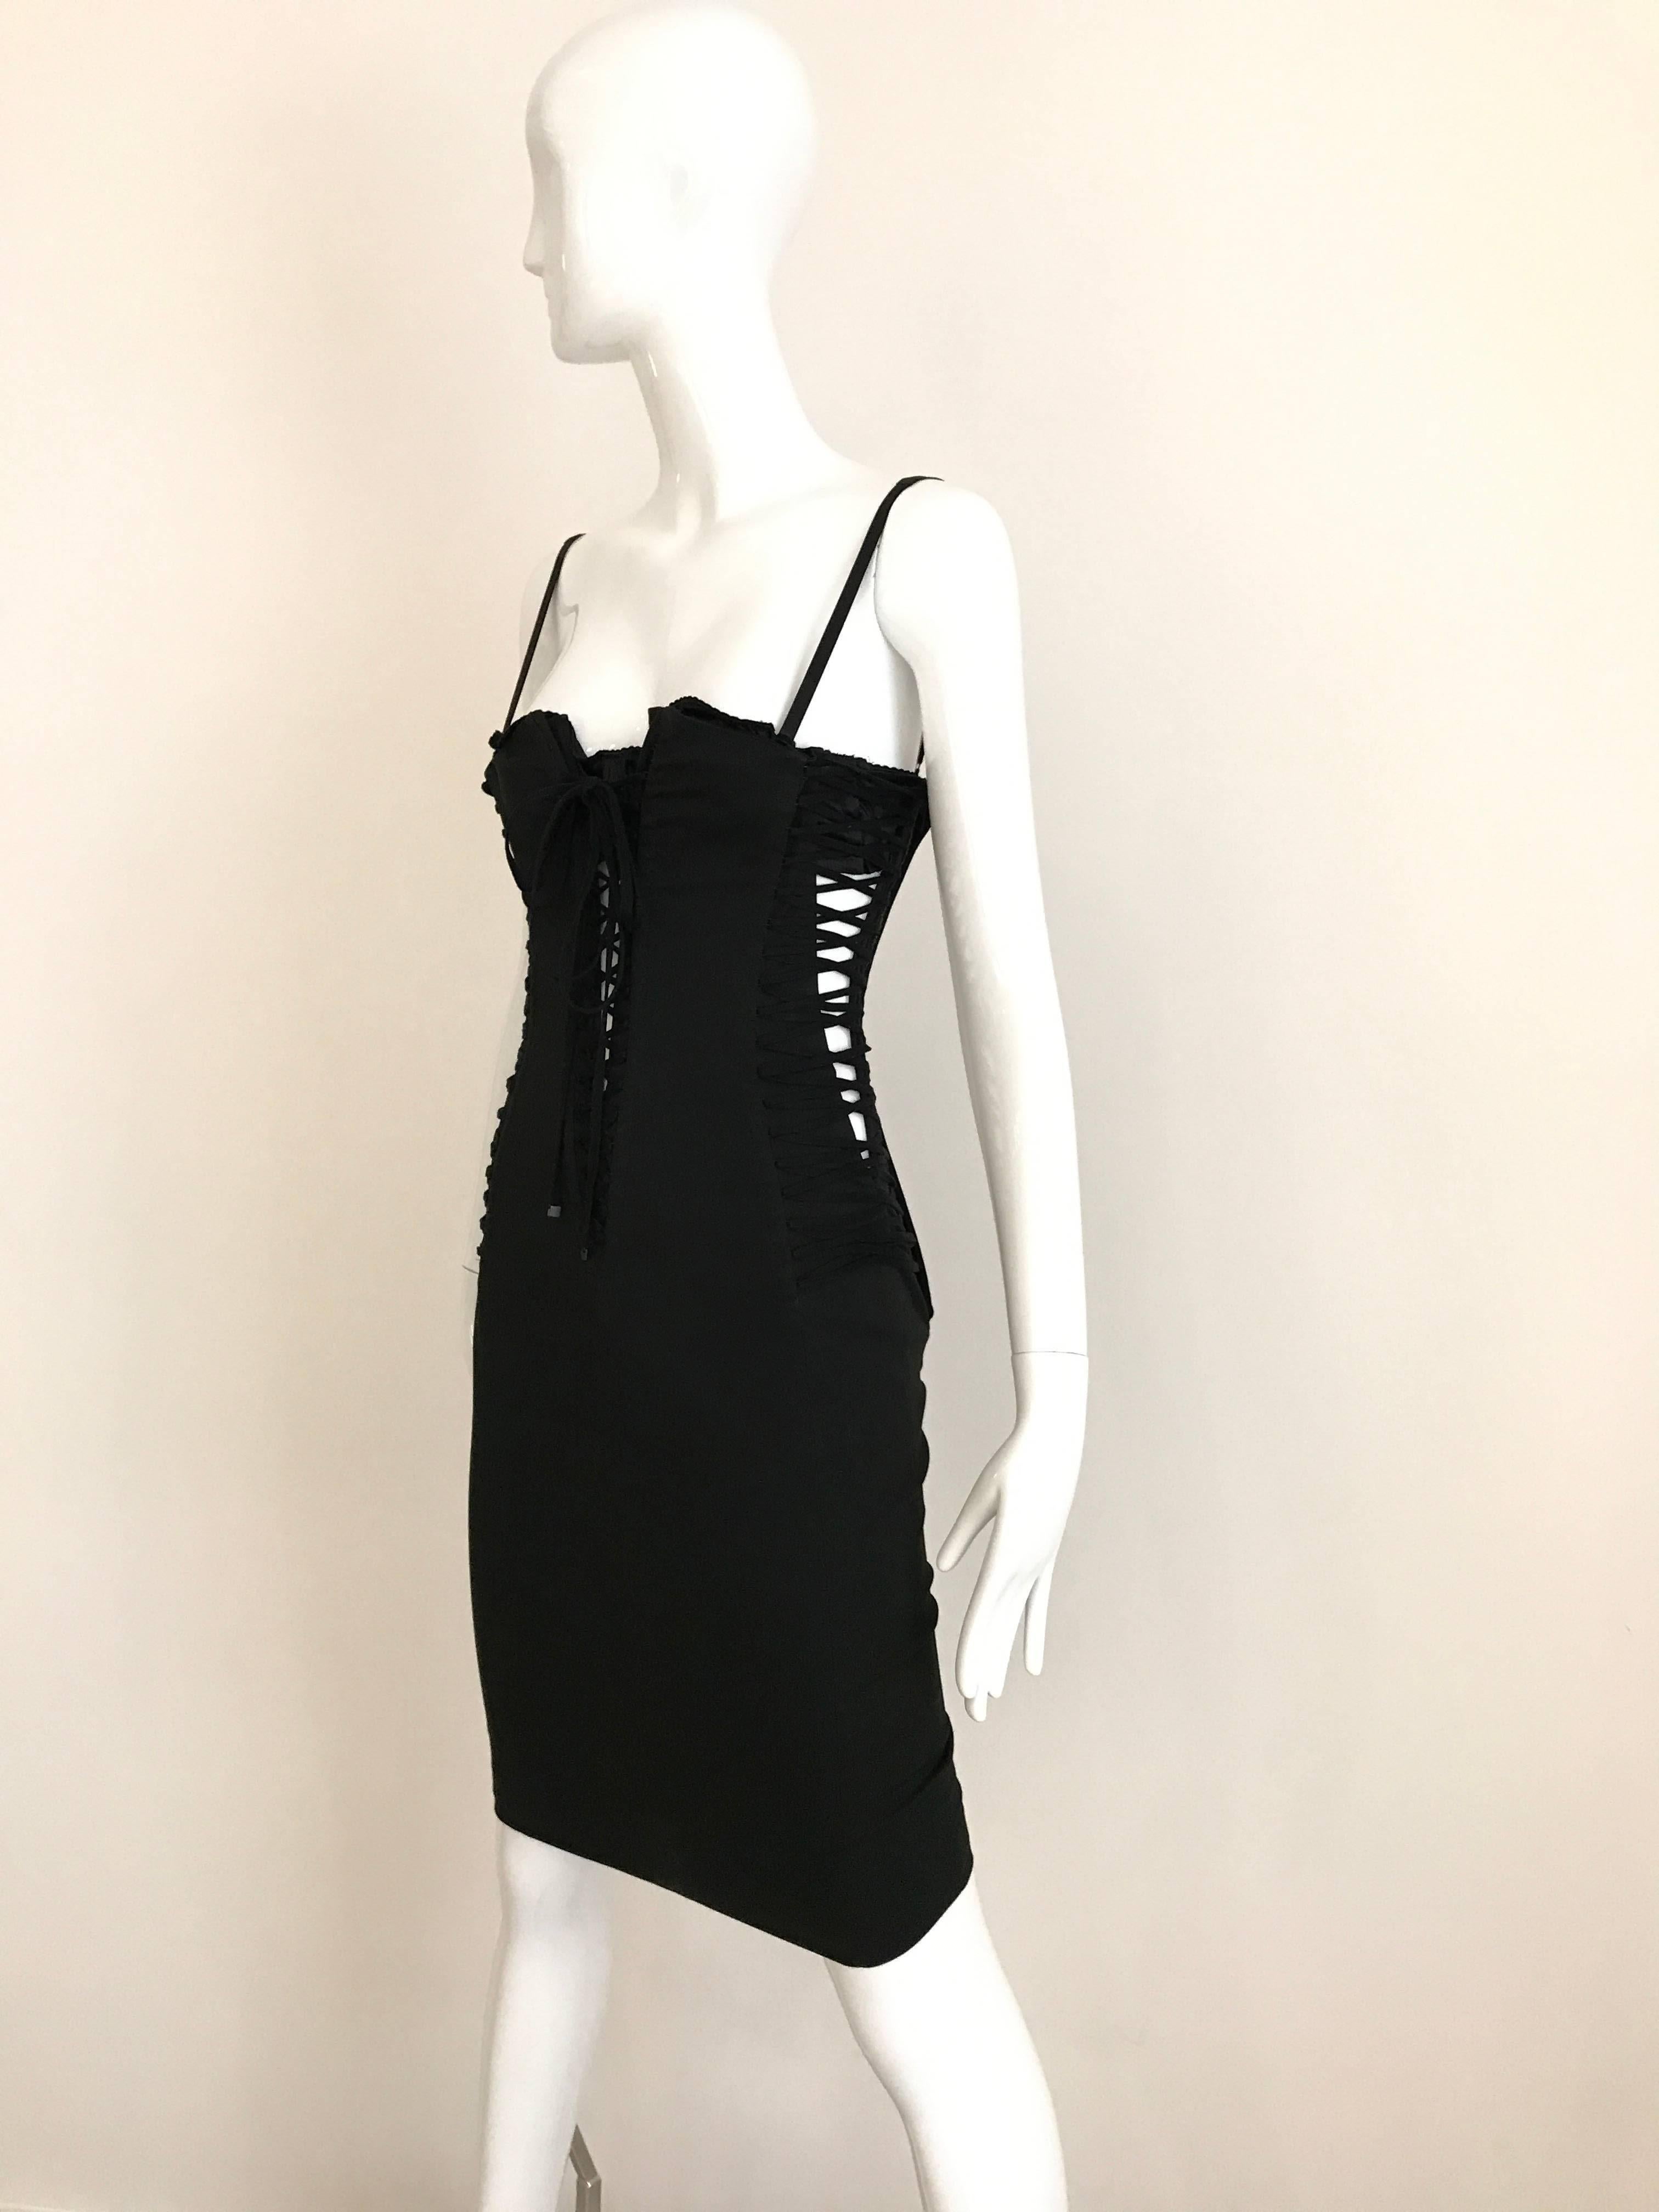 Early 2000s Classic Dolce Gabanna Black Cotton lace up sexy Bustier dress with bra .  
Dress has little bit stretch. Peek a boo both side and front lace. Dress has invisible zipper on the side.
Marked size 40 but it fit US 0/2
Bust: Stretch to 32